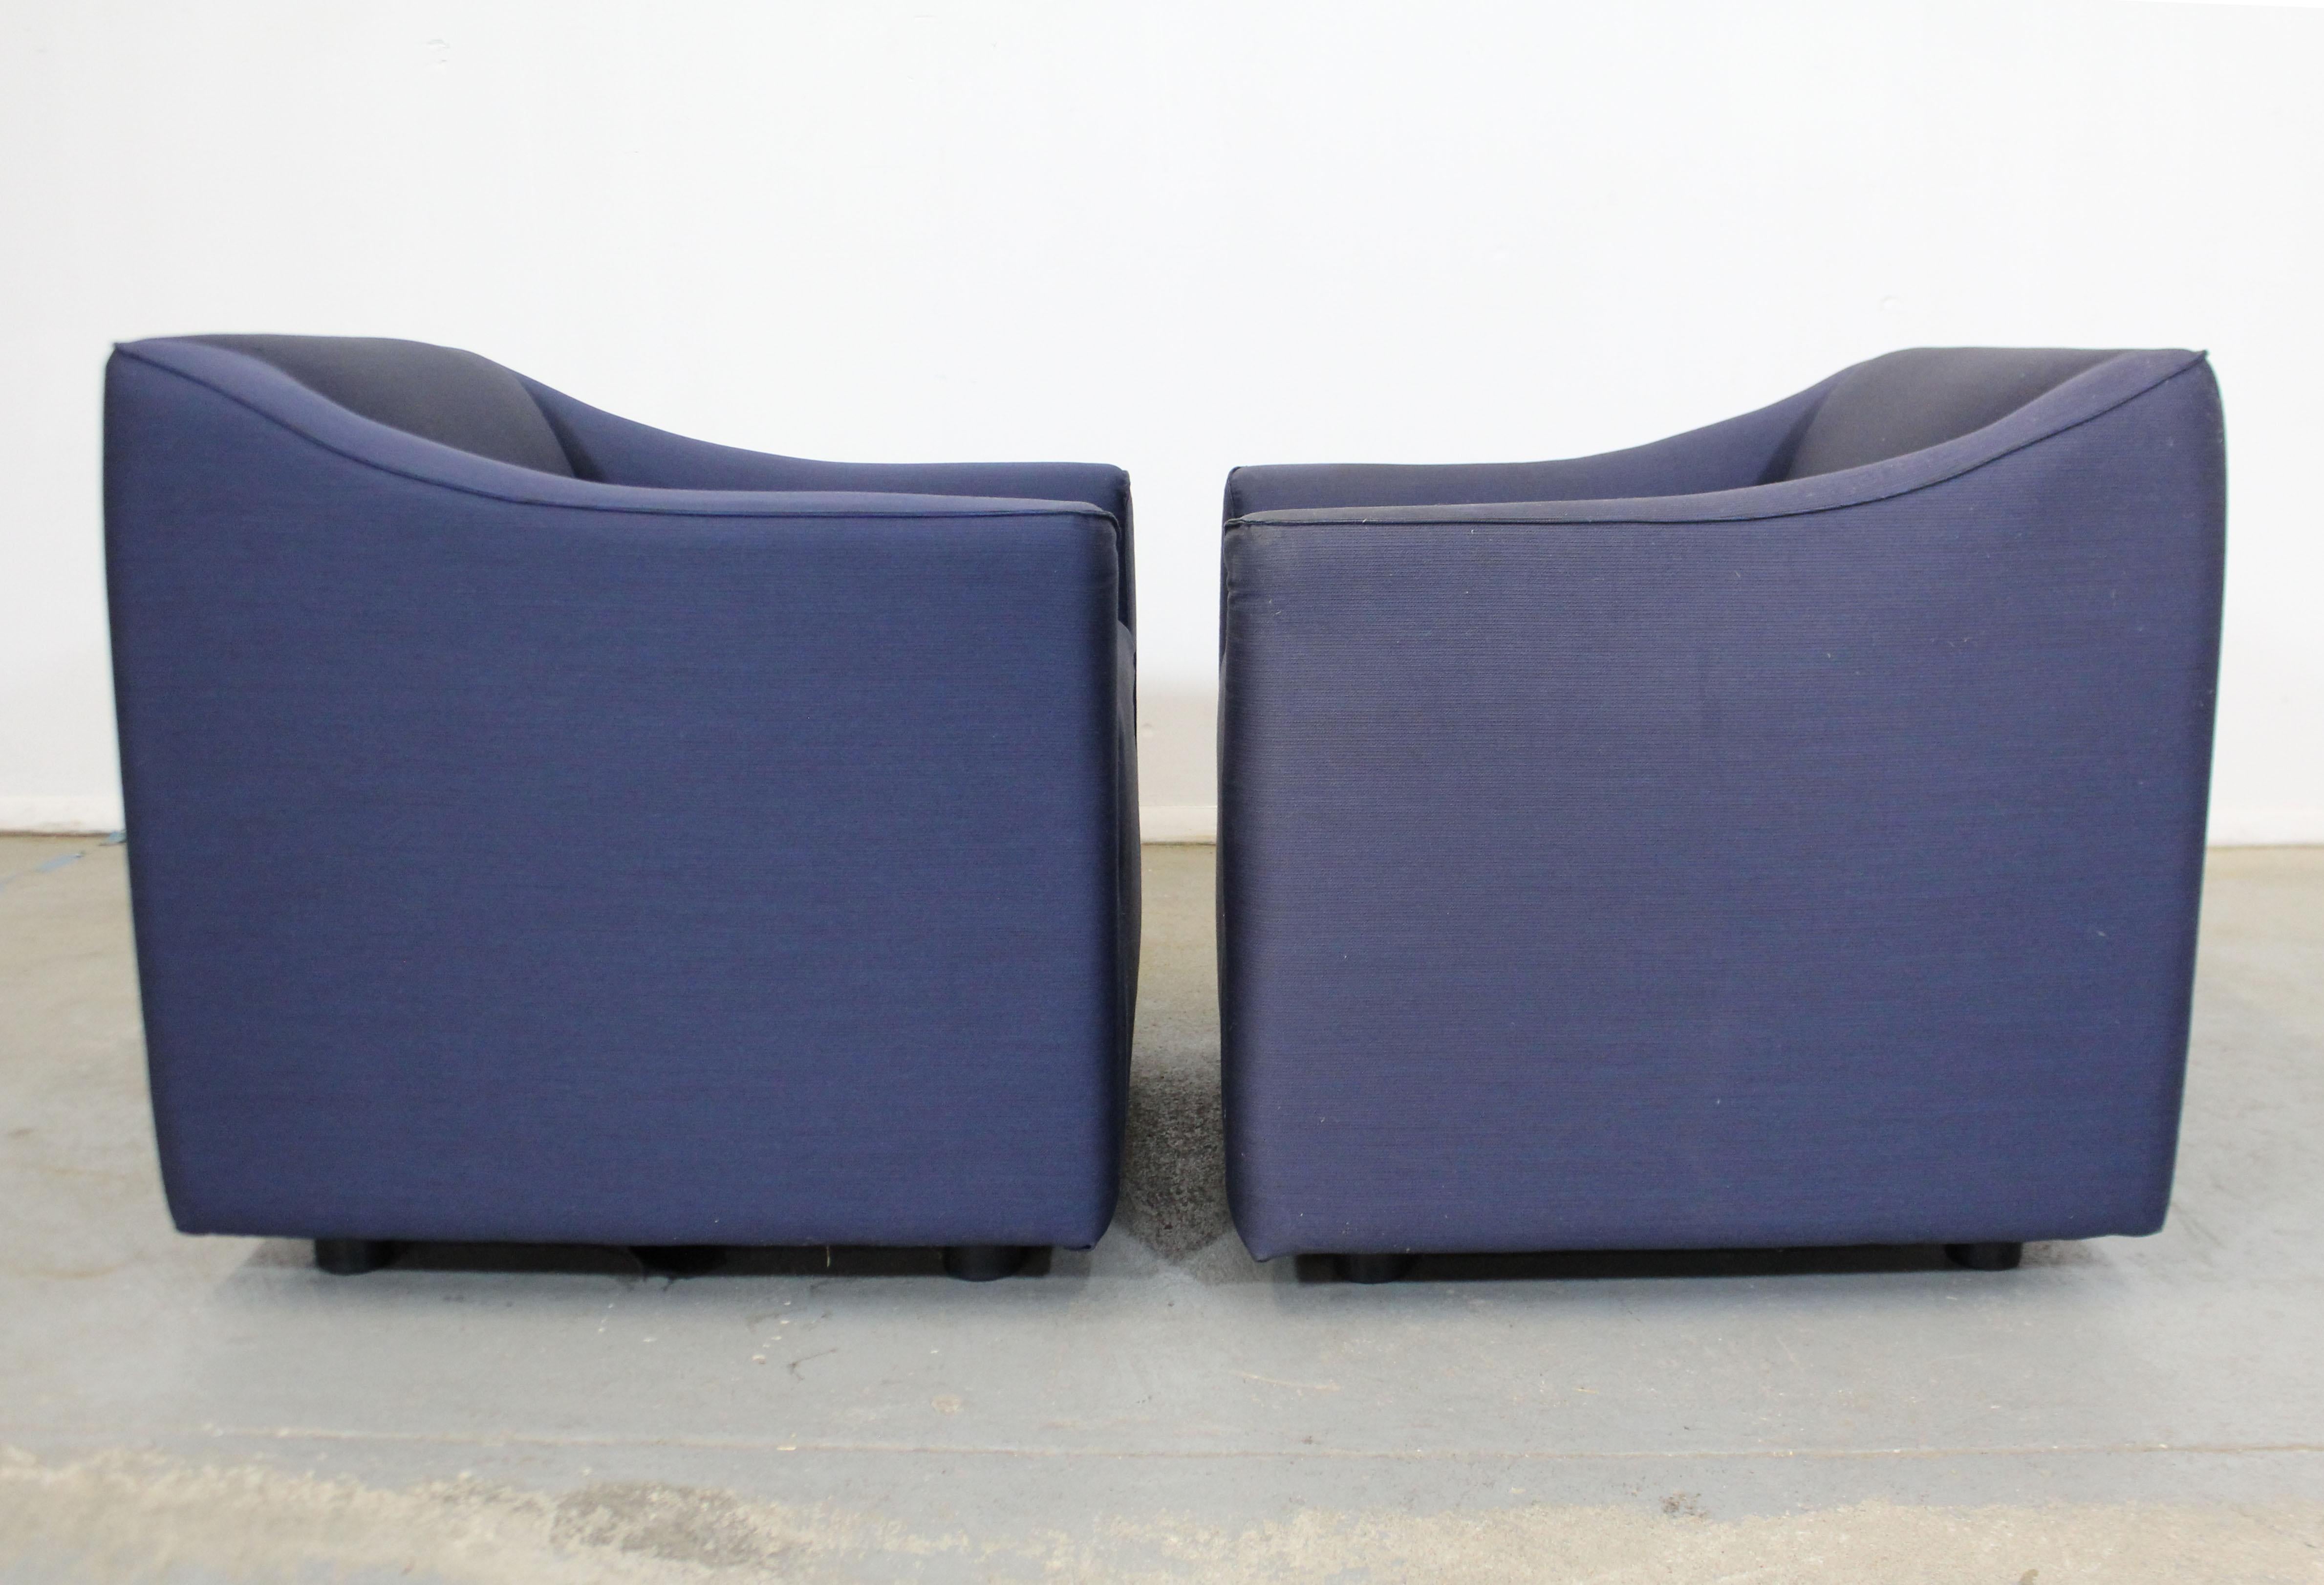 American Pair of Vintage Modern Lounge/Club Chairs by Knoll